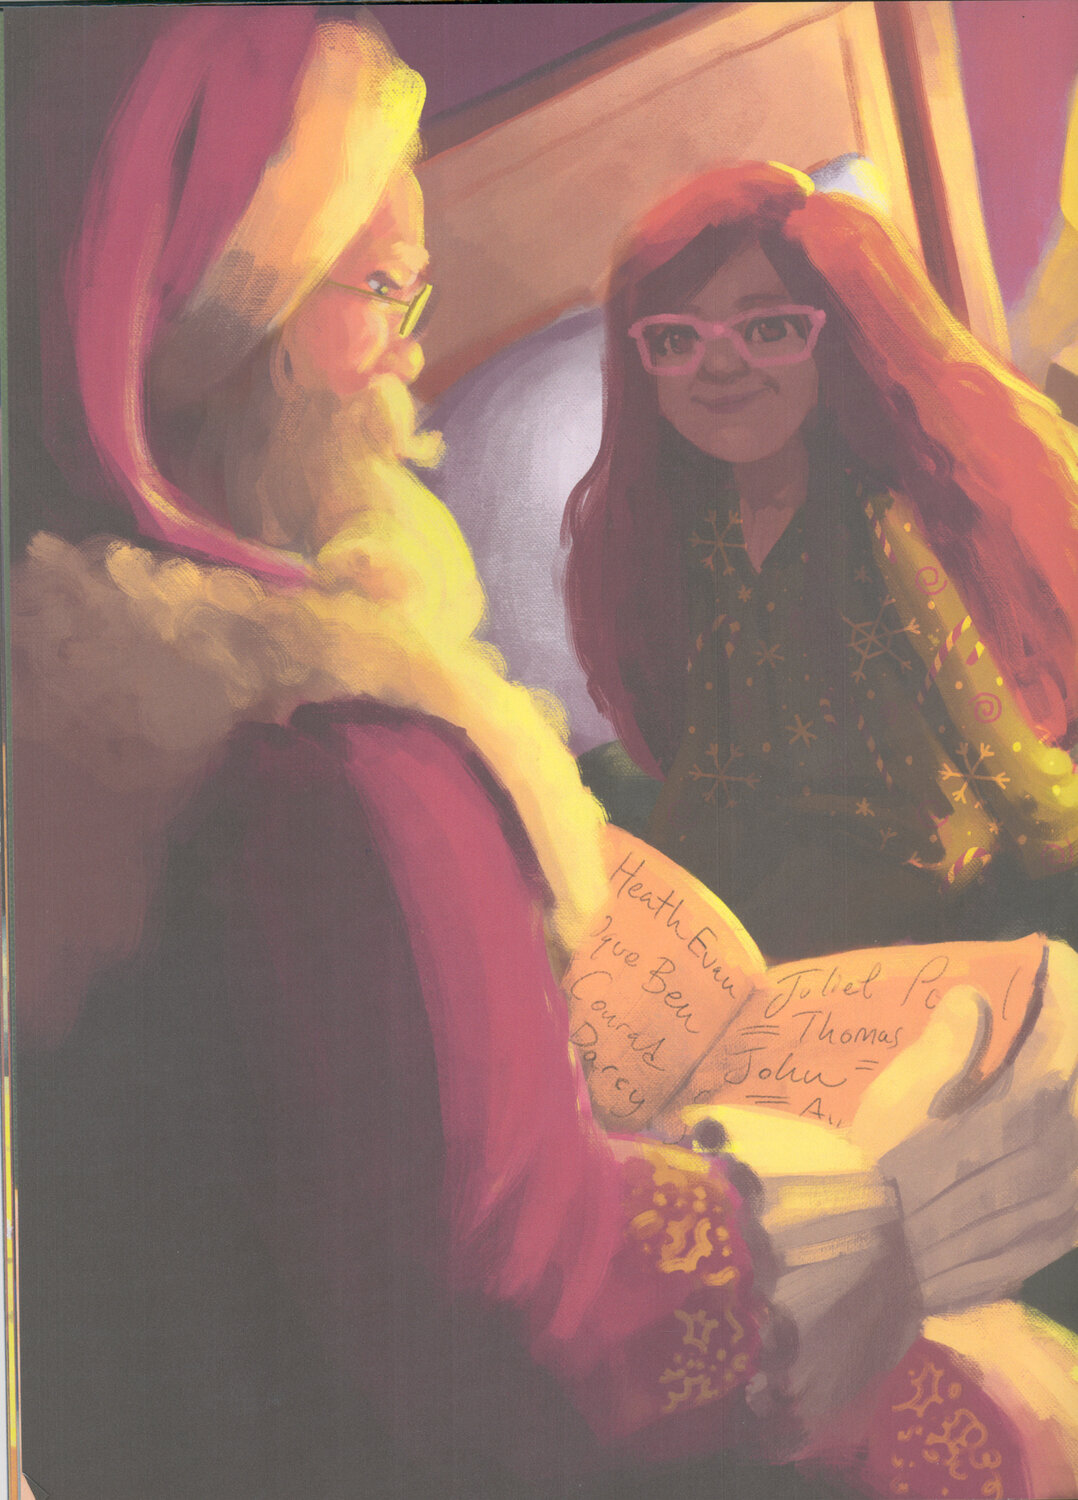 CHECKING HIS LIST: An illustration from Evans’ book done by Rhode Island School of Design alumnus Elisha Gillette showing Santa checking and his list.